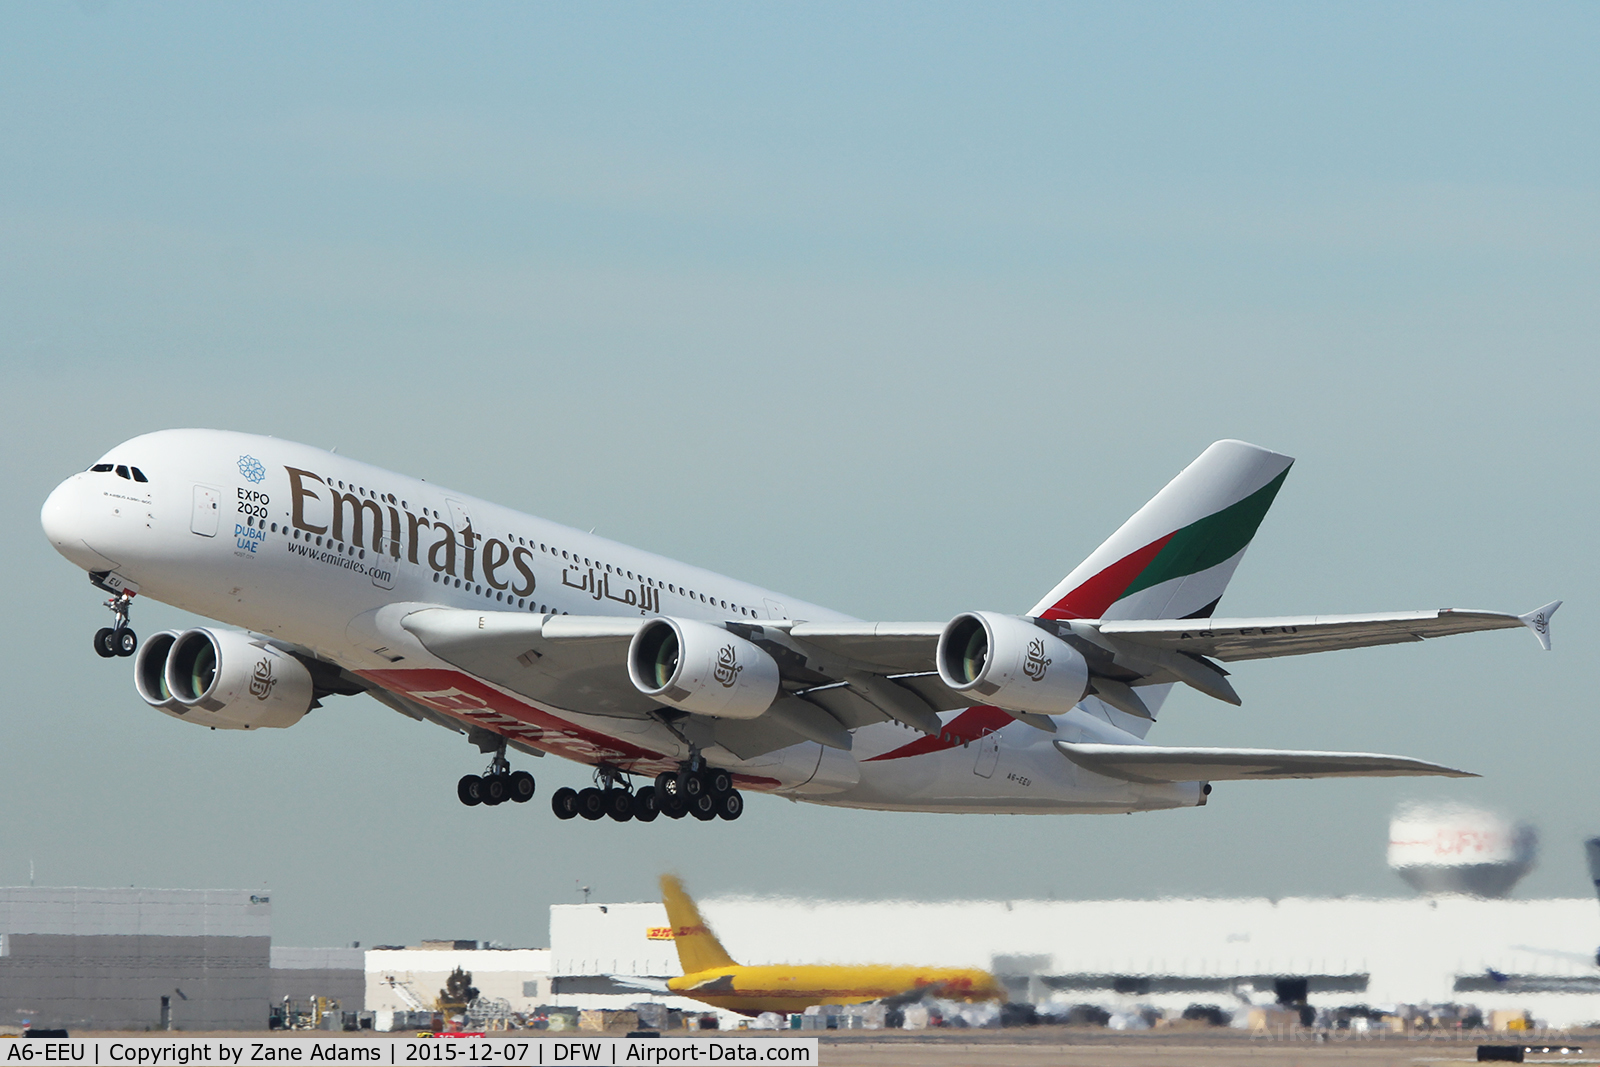 A6-EEU, 2013 Airbus A380-861 C/N 147, Emirates A380 departing DFW Airport